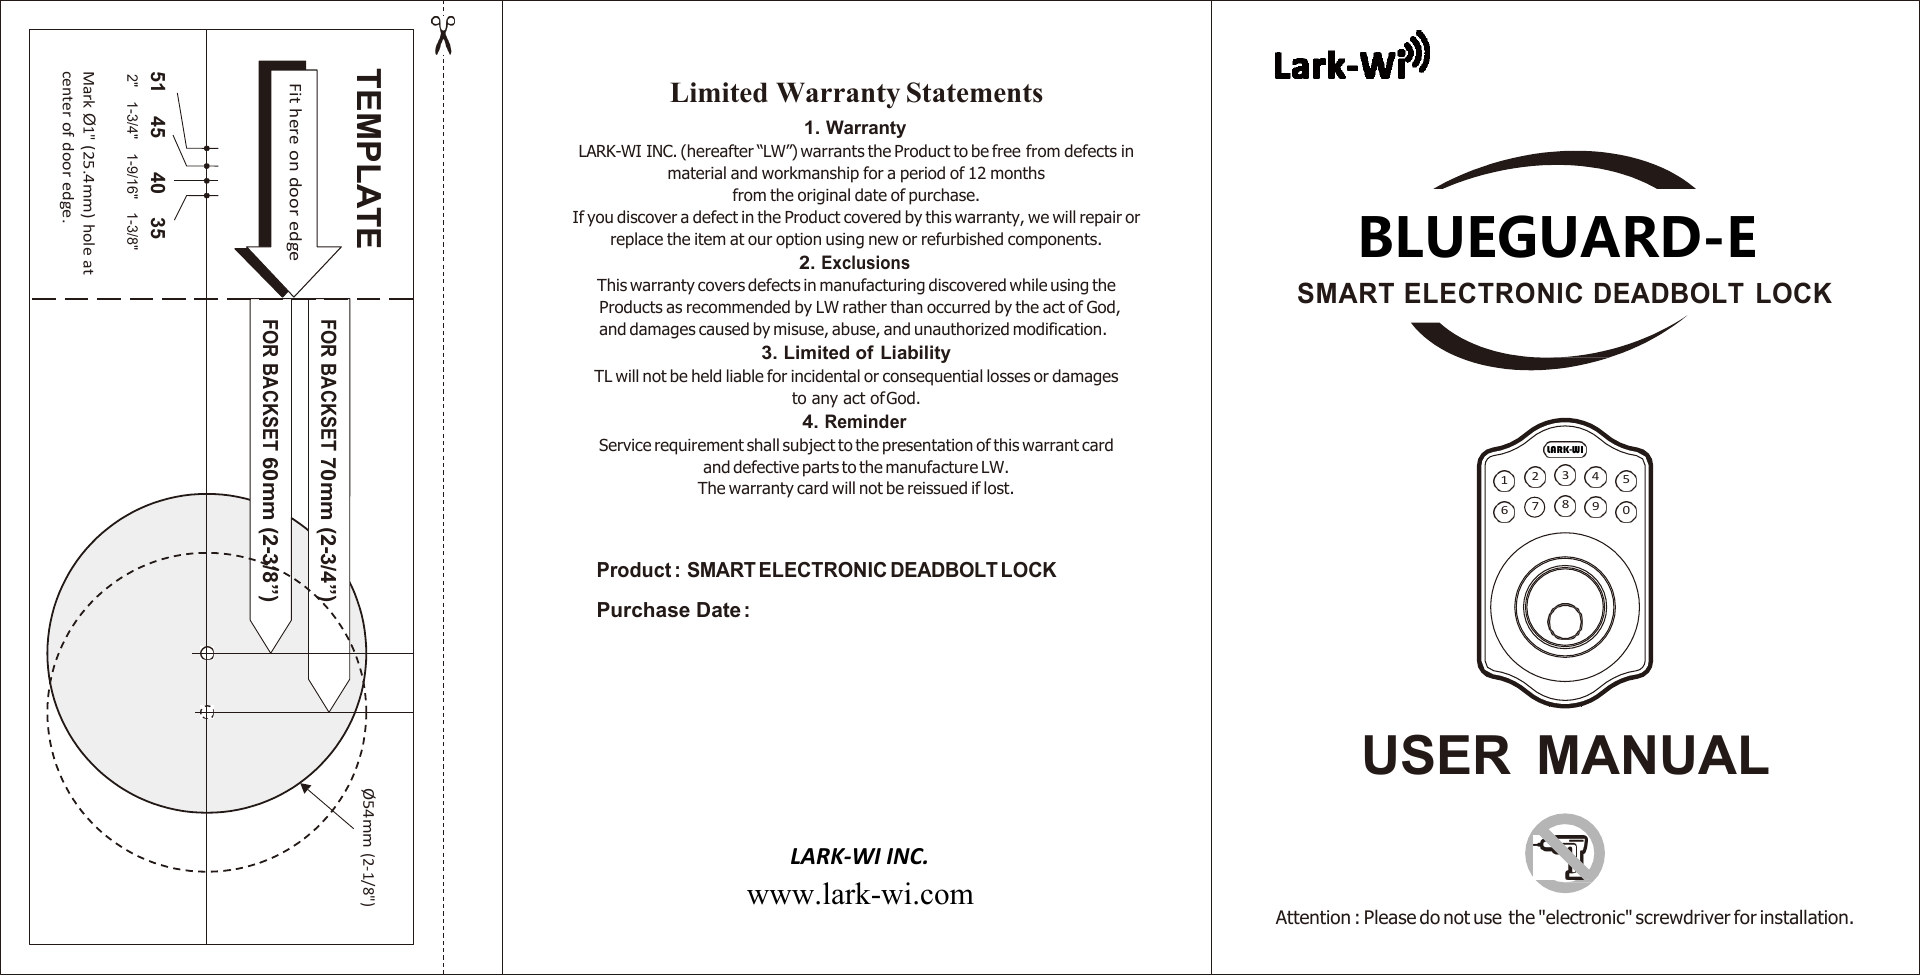    Limited Warranty Statements 1. Warranty LARK-WI INC. (hereafter “LW”) warrants the Product to be free from defects in material and workmanship for a period of 12 months from the original date of purchase. If you discover a defect in the Product covered by this warranty, we will repair or replace the item at our option using new or refurbished components. 2. Exclusions This warranty covers defects in manufacturing discovered while using the Products as recommended by LW rather than occurred by the act of God, and damages caused by misuse, abuse, and unauthorized modification. 3. Limited of Liability TL will not be held liable for incidental or consequential losses or damages to any act of God. 4. Reminder Service requirement shall subject to the presentation of this warrant card and defective parts to the manufacture LW. The warranty card will not be reissued if lost.  BLUEGUARD-E SMART ELECTRONIC DEADBOLT  LOCK      1  2  3  4  5 6  7  8  9  0  Product :  SMART ELECTRONIC DEADBOLT LOCK Purchase Date :     USER  MANUAL    LARK-WI INC.  www.lark-wi.com     Attention : Please do not use the &quot;electronic&quot; screwdriver for installation.  Ø 54mm (2-1/8&quot;) TEMPLATE FOR BACKSET 70mm (2-3/4”) Fit here on door edge FOR BACKSET 60mm (2-3/8”) 51 45 40 35 2&quot;   1-3/4&quot;   1-9/16&quot;   1-3/8&quot; Mark Ø1&quot; (25.4mm) hole at center of door edge. LARK-WI 